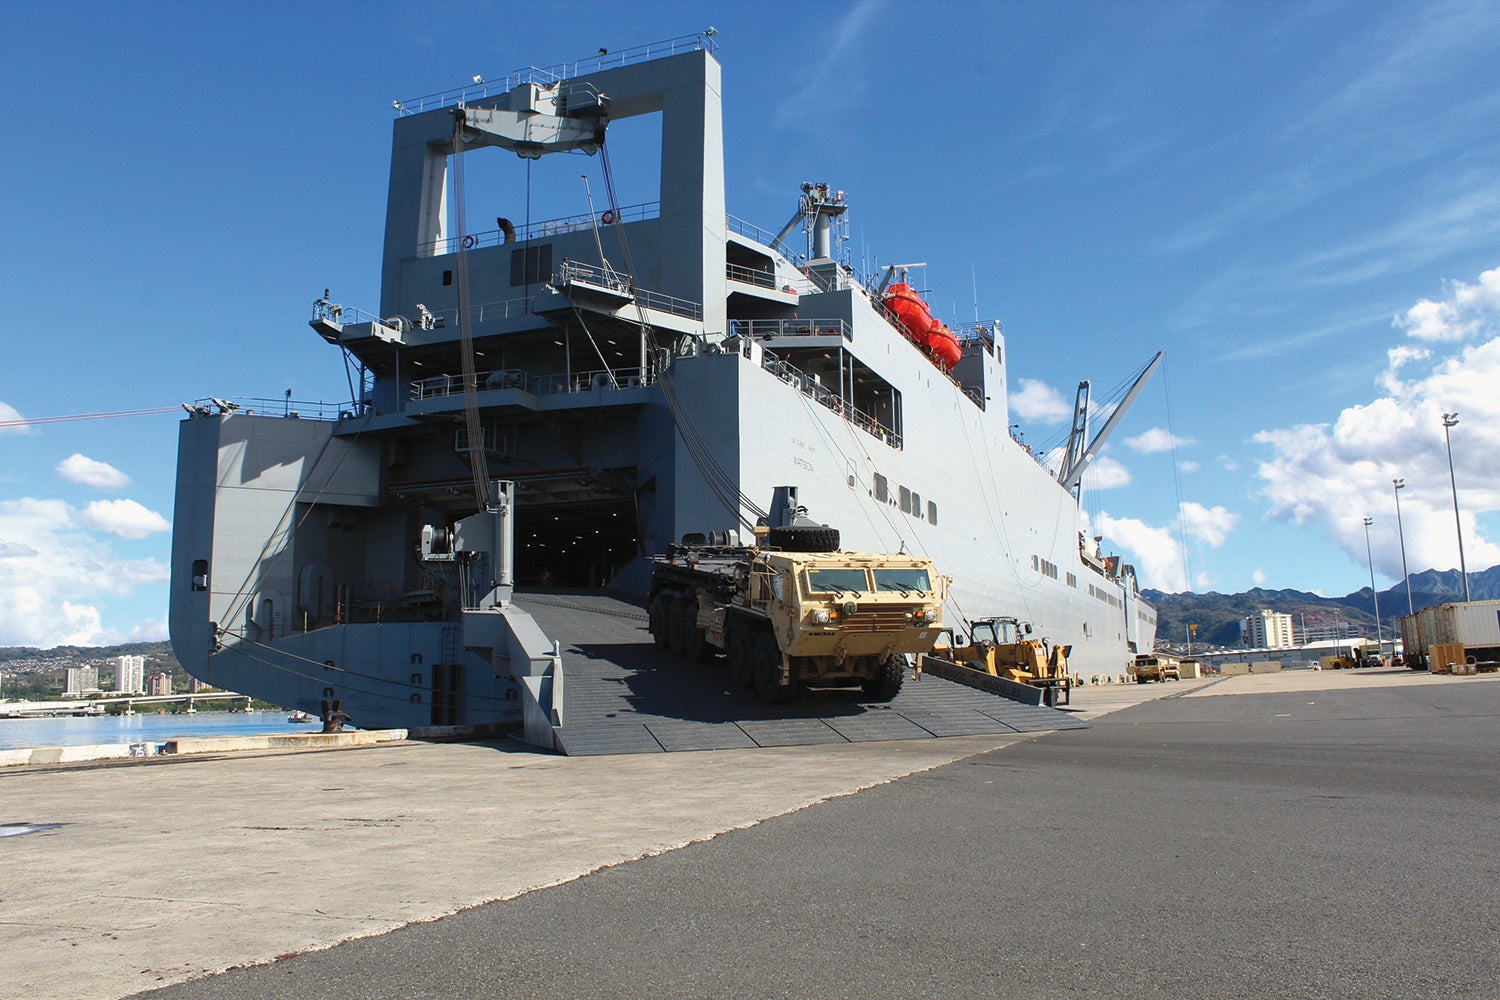 Army equipment is offloaded at Pearl Harbor, Hawaii. (Credit: U.S. Army/Alison Martinez)